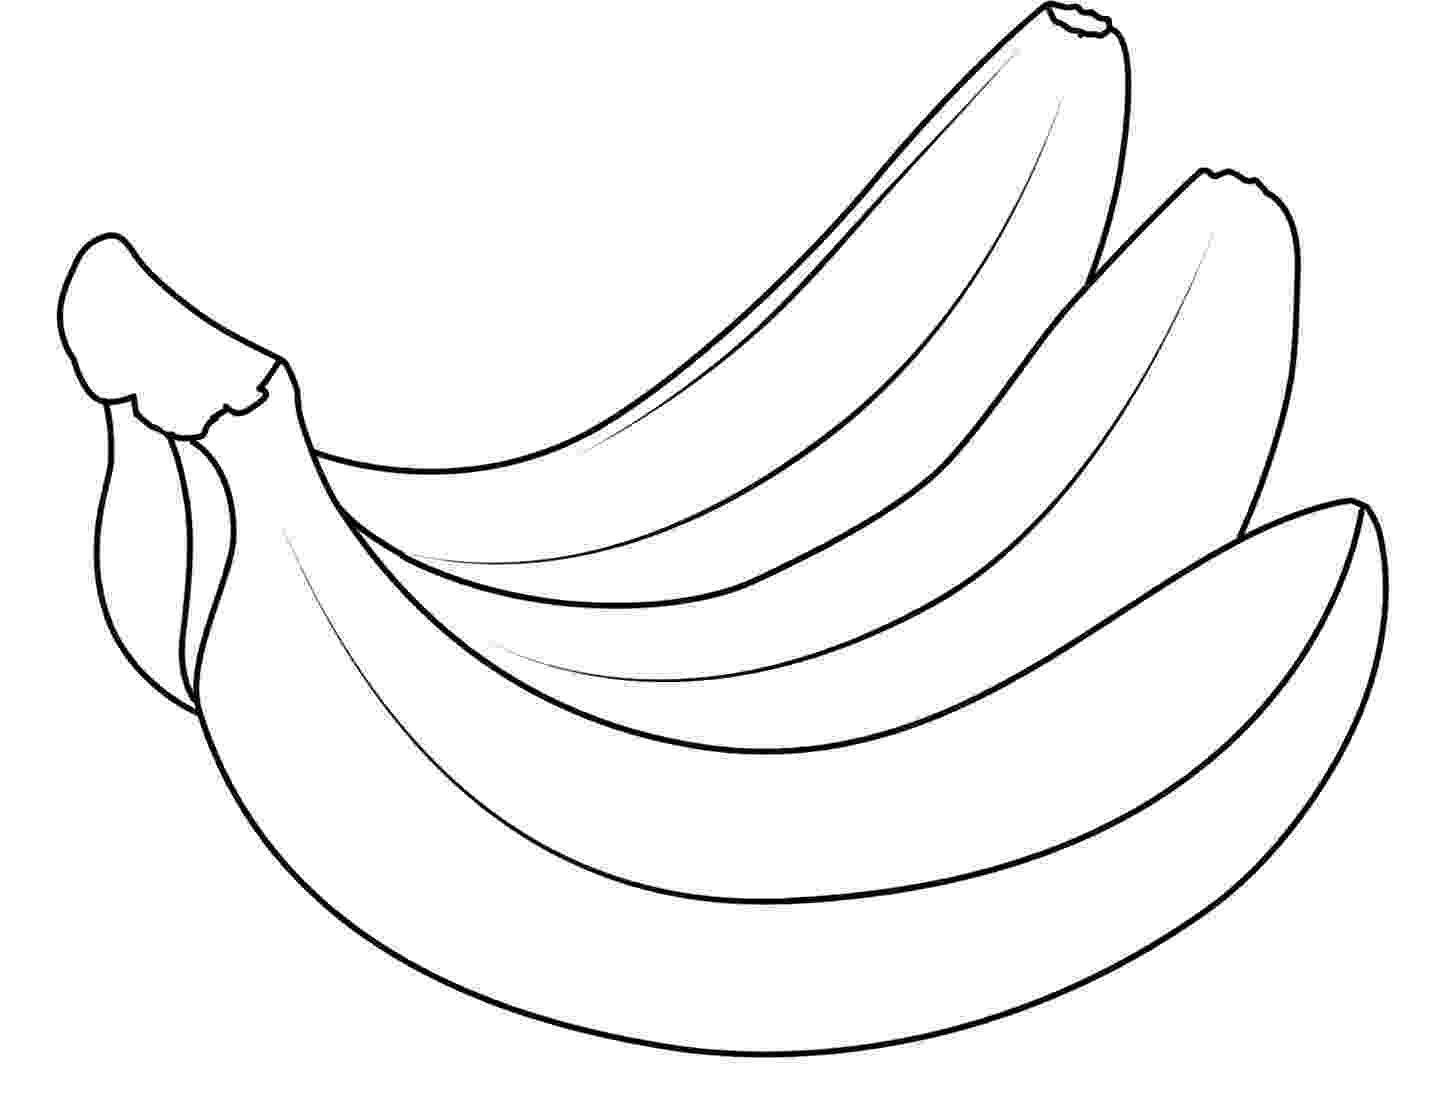 pictures of bananas to print banana coloring pages to download and print for free bananas pictures of to print 